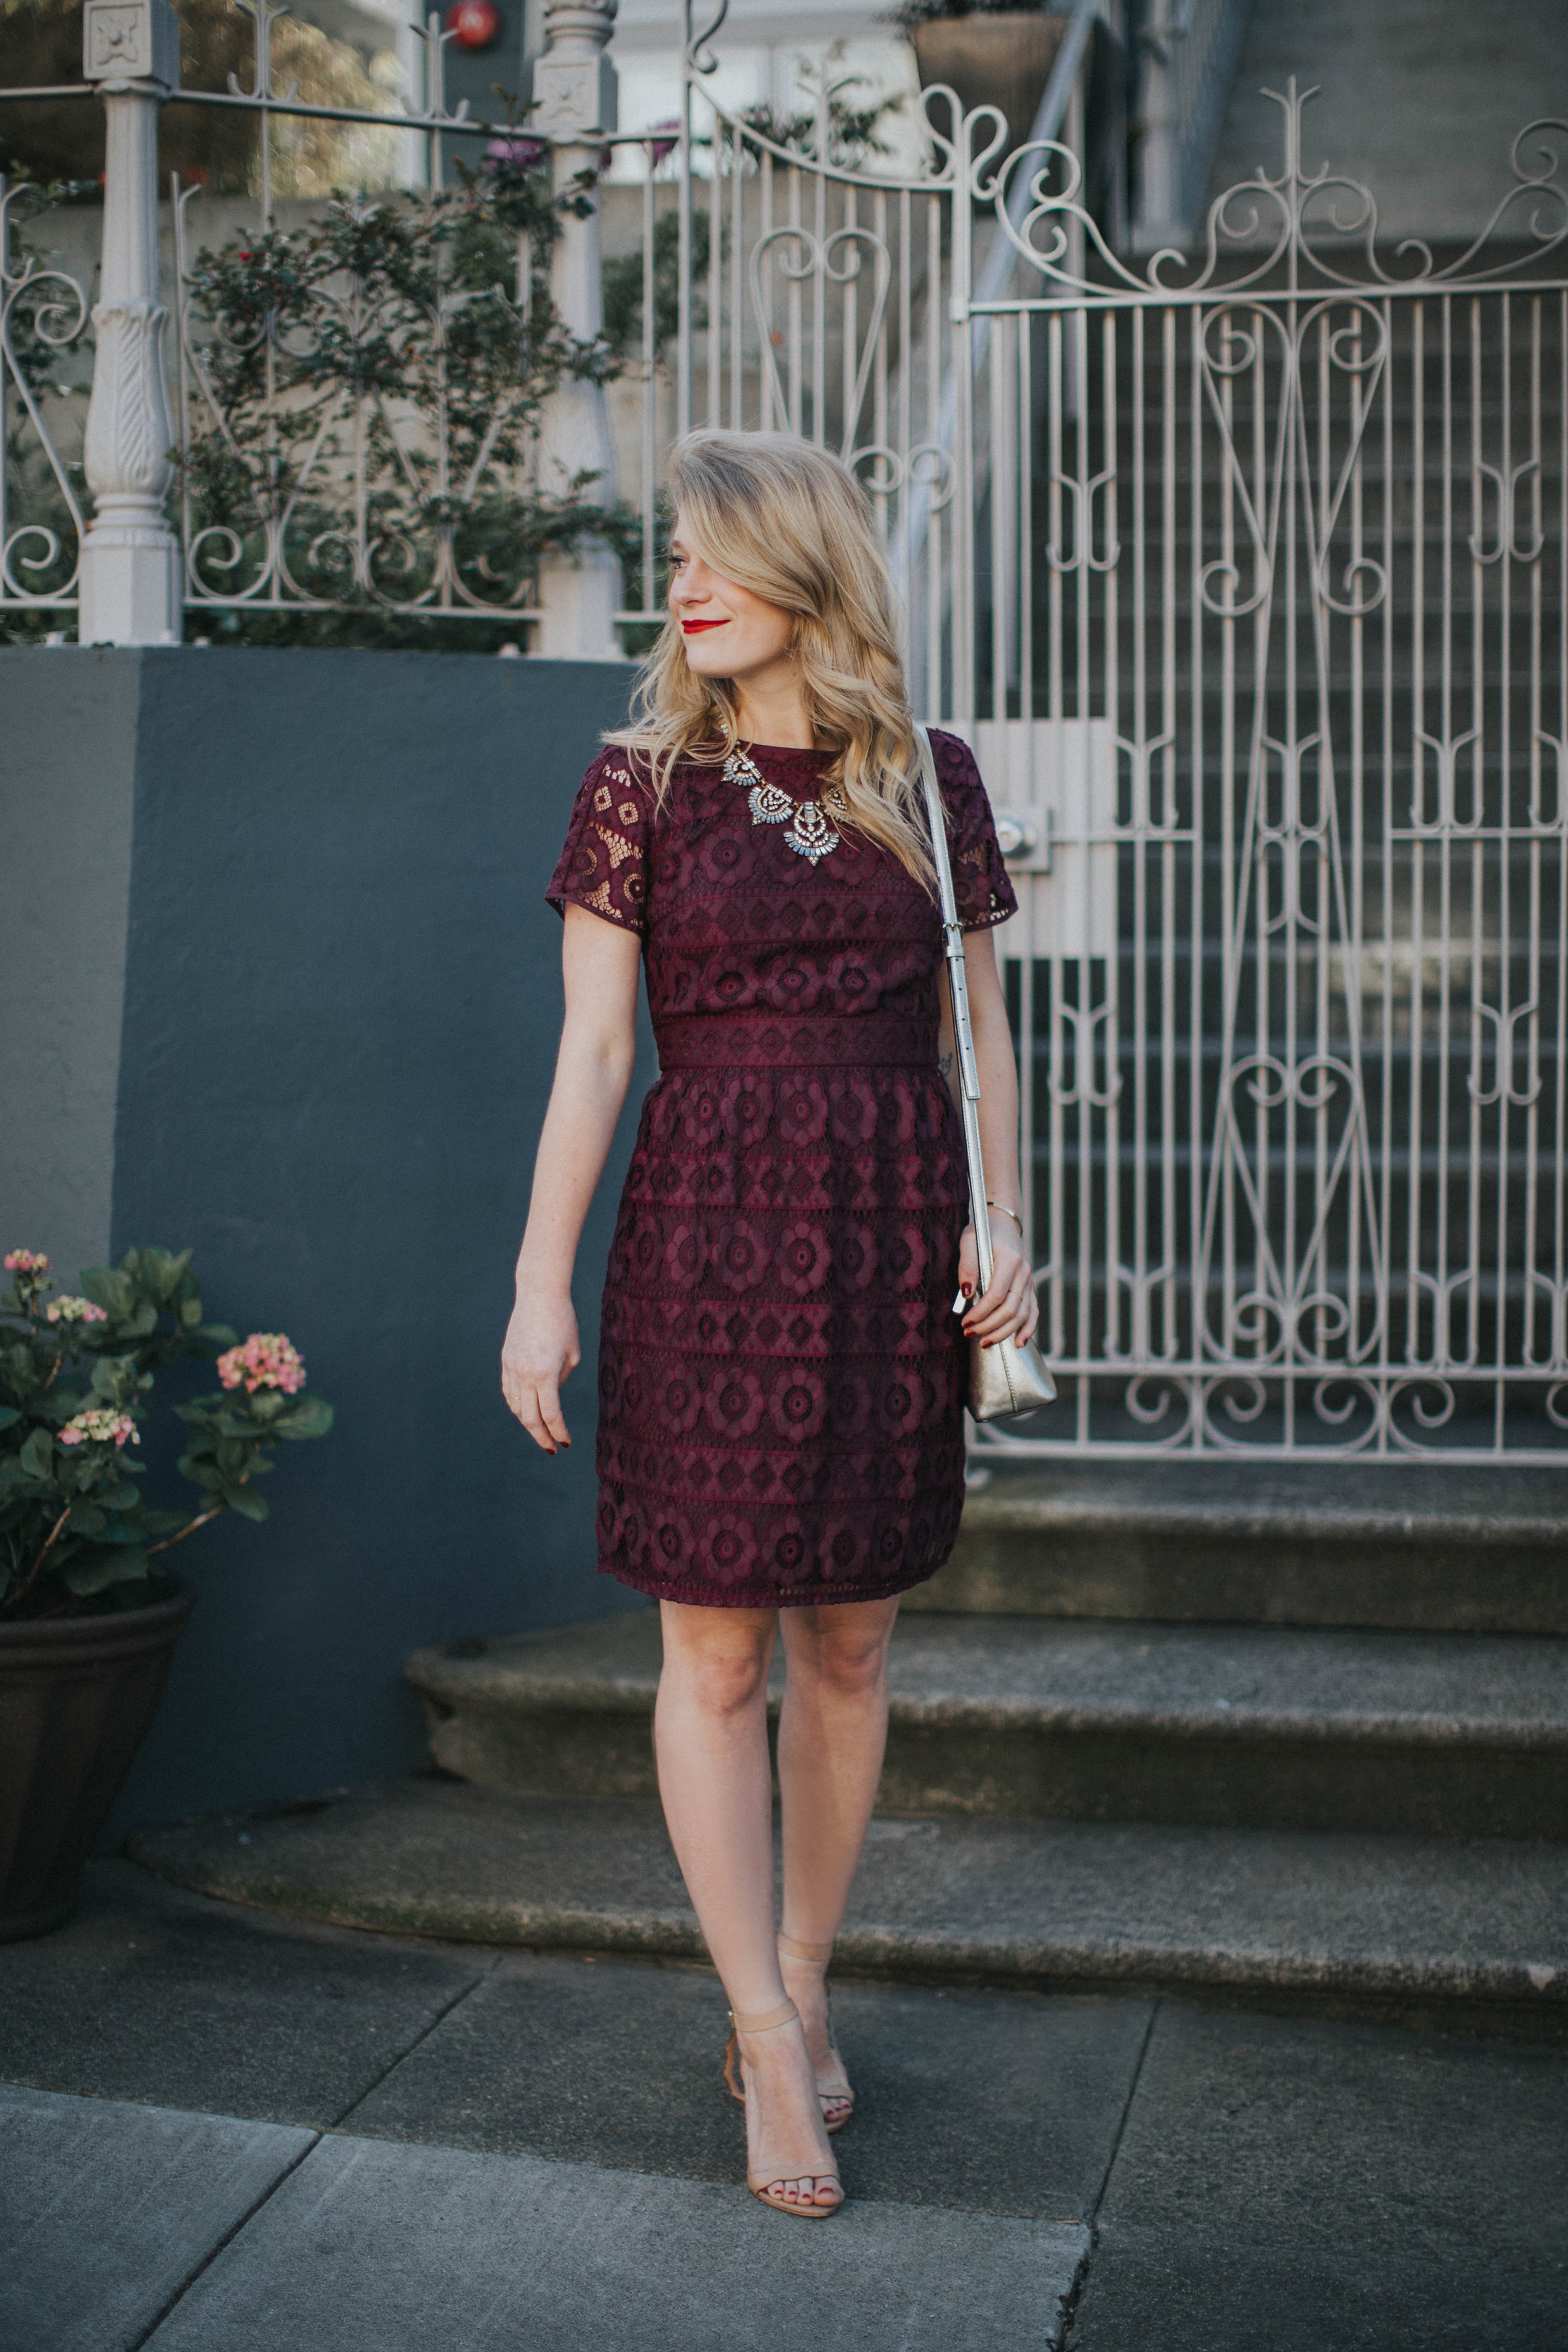 This purple LOFT lace dress is the best for spring weddings paired with a BaubleBar statement necklace and Loeffler Randall sandals.